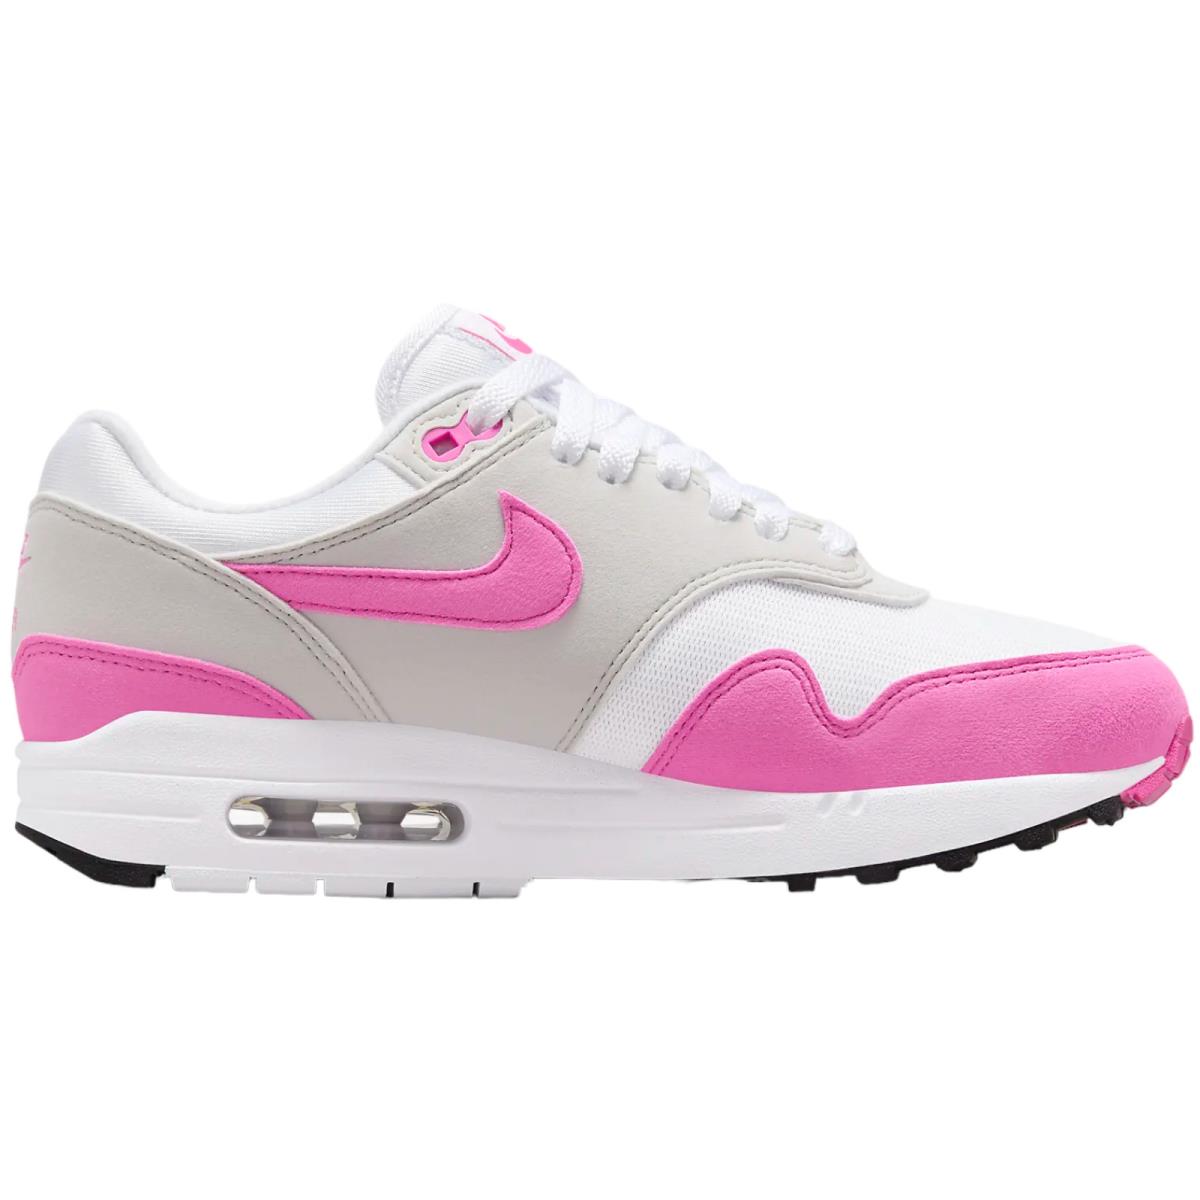 Nike Air Max 1 Women`s Casual Shoes All Colors US Sizes 6-11 White/Neutral Grey/Black/Playful Pink